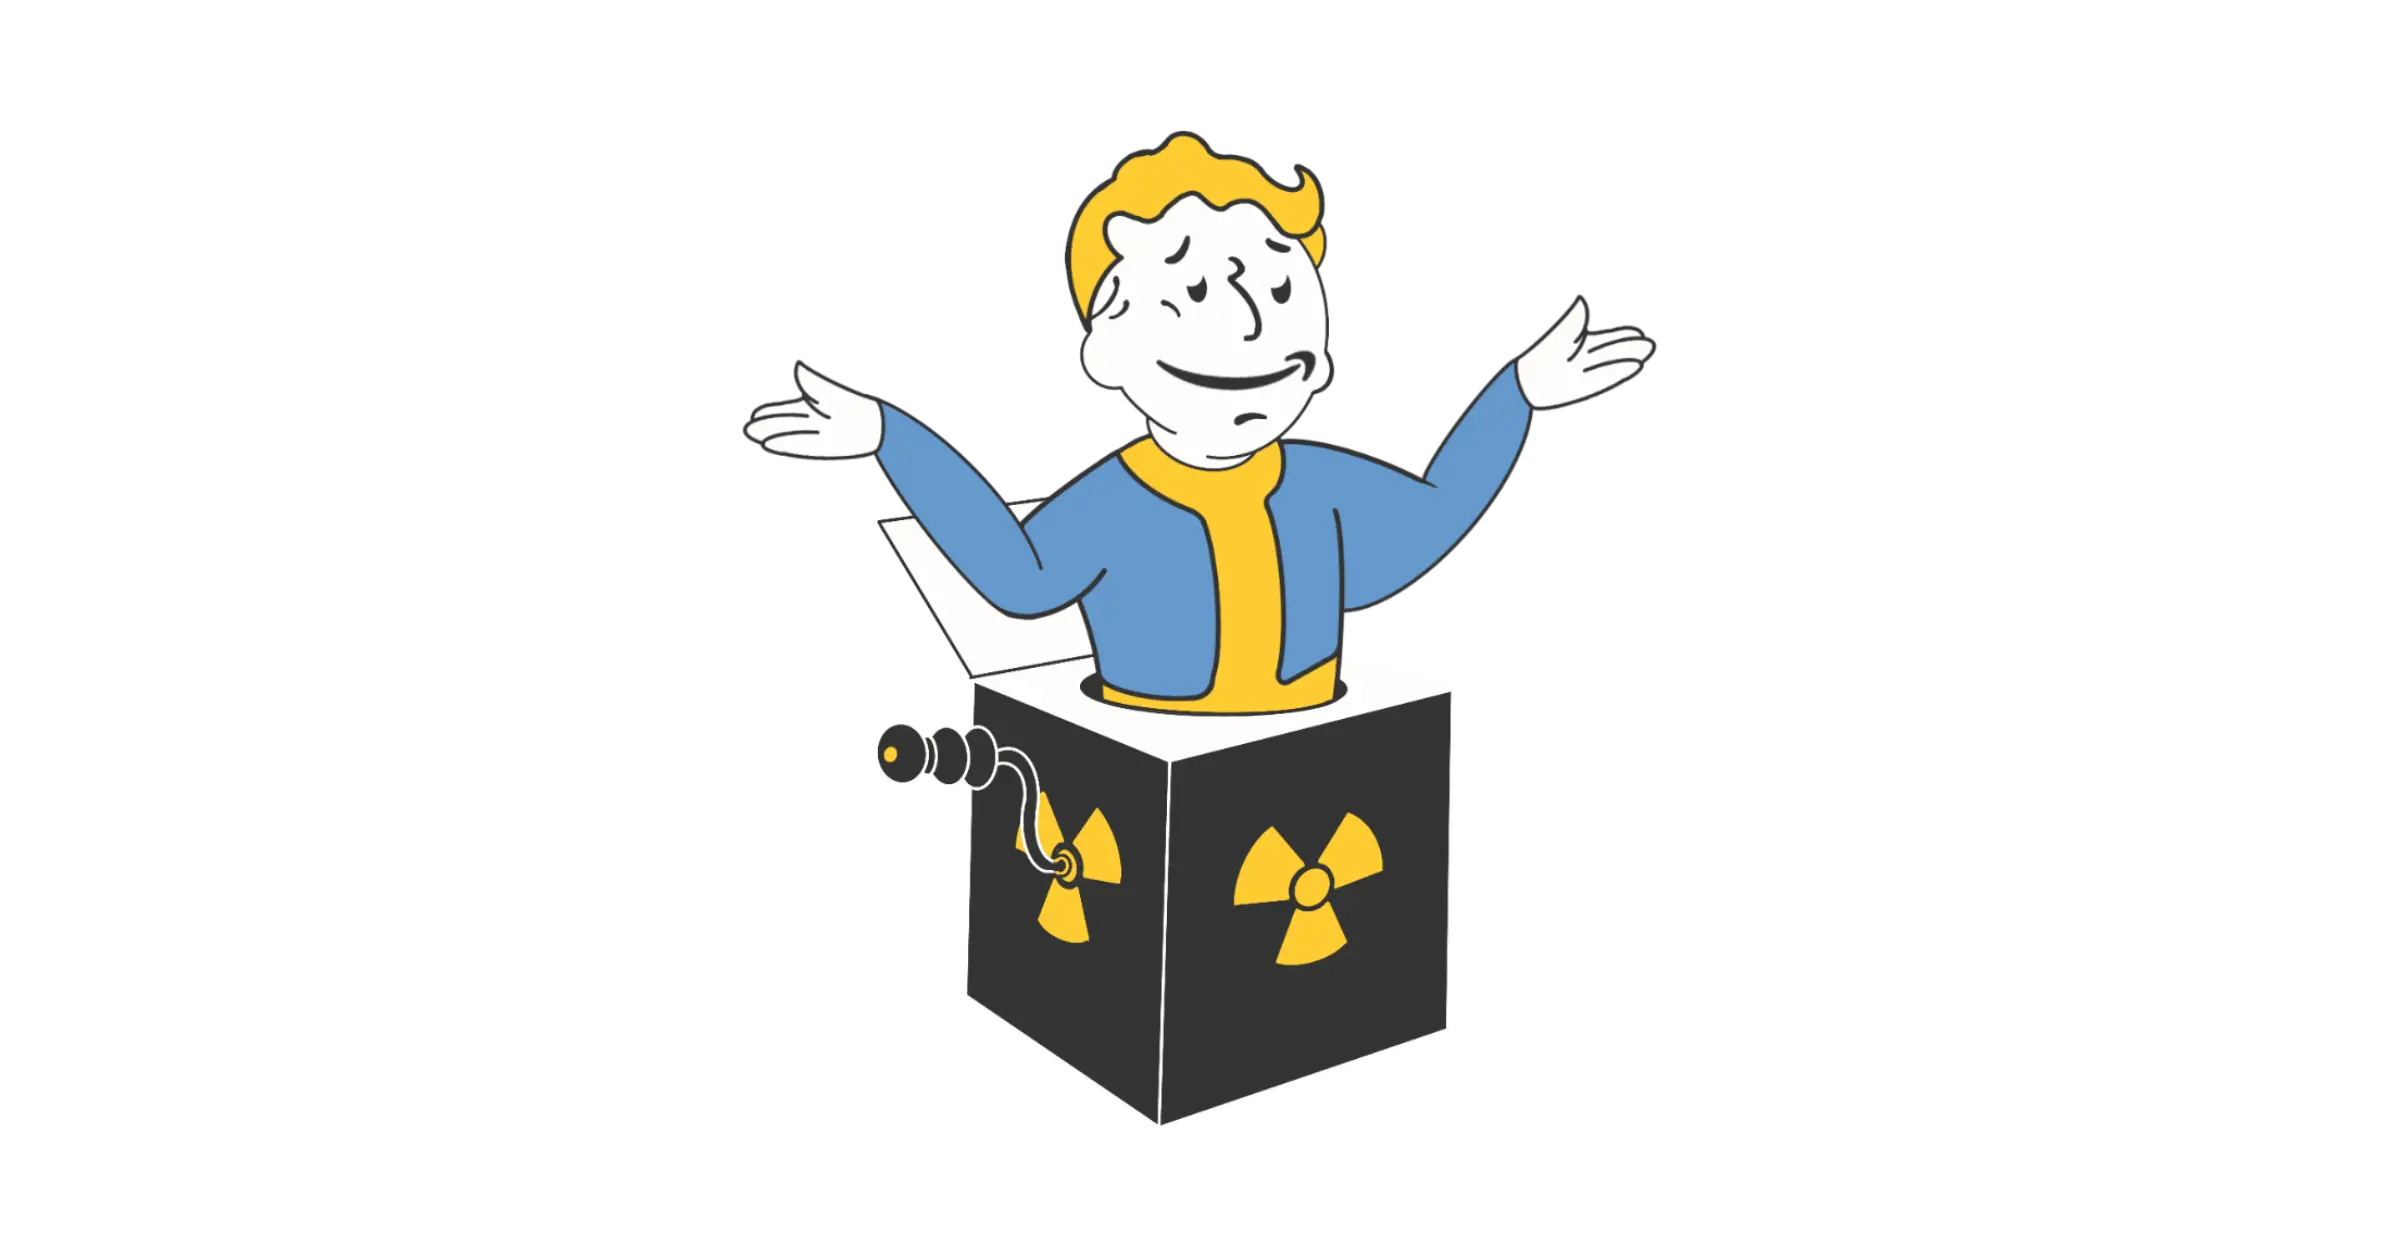 Fallout Pip-boy shrugged, the mascot with the Amazon “smile logo” replacing its lips, shrugging the shoulders about the television adaptation of the game franchise